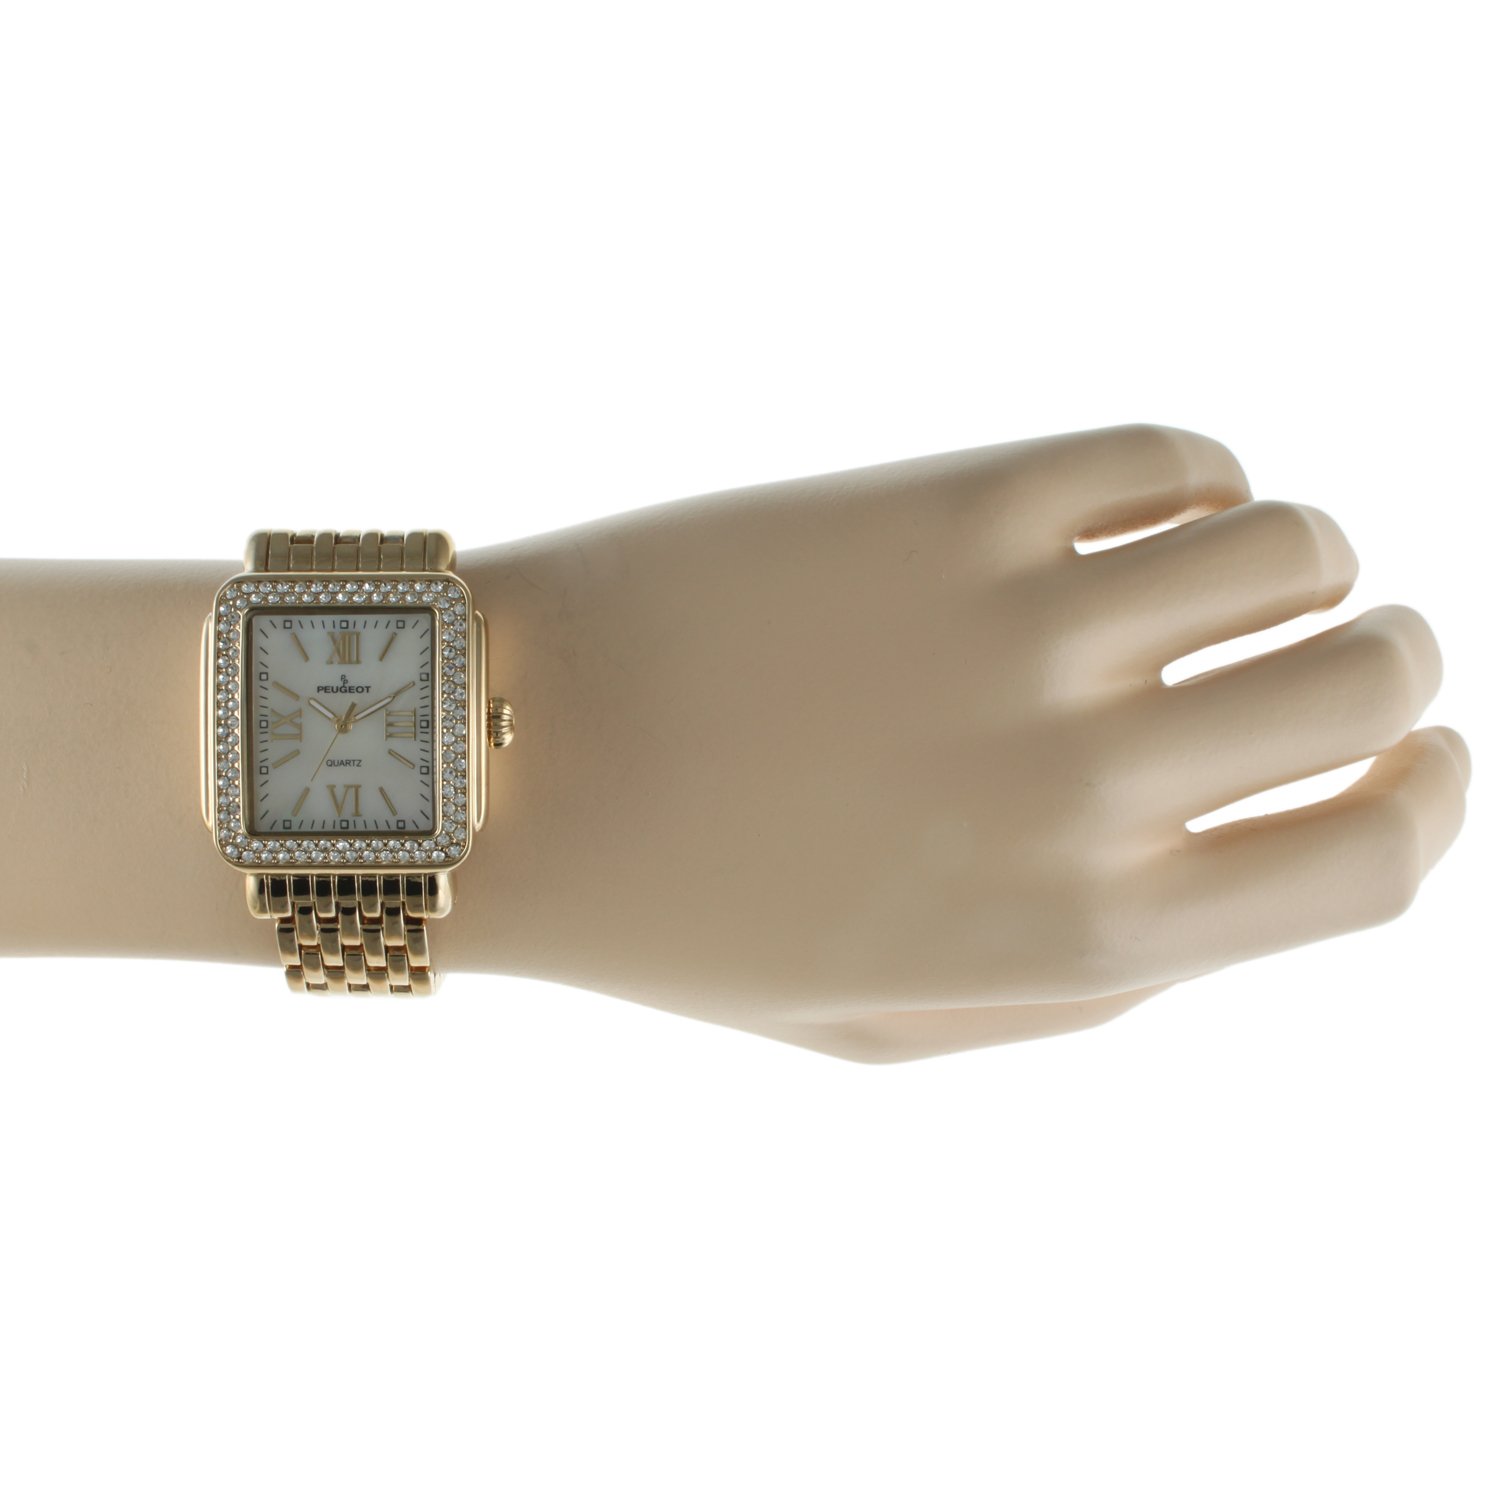 Peugeot Women Rectangle Dress Watch with Crystal Decorated Bezel, Roman Numerals and Bracelet